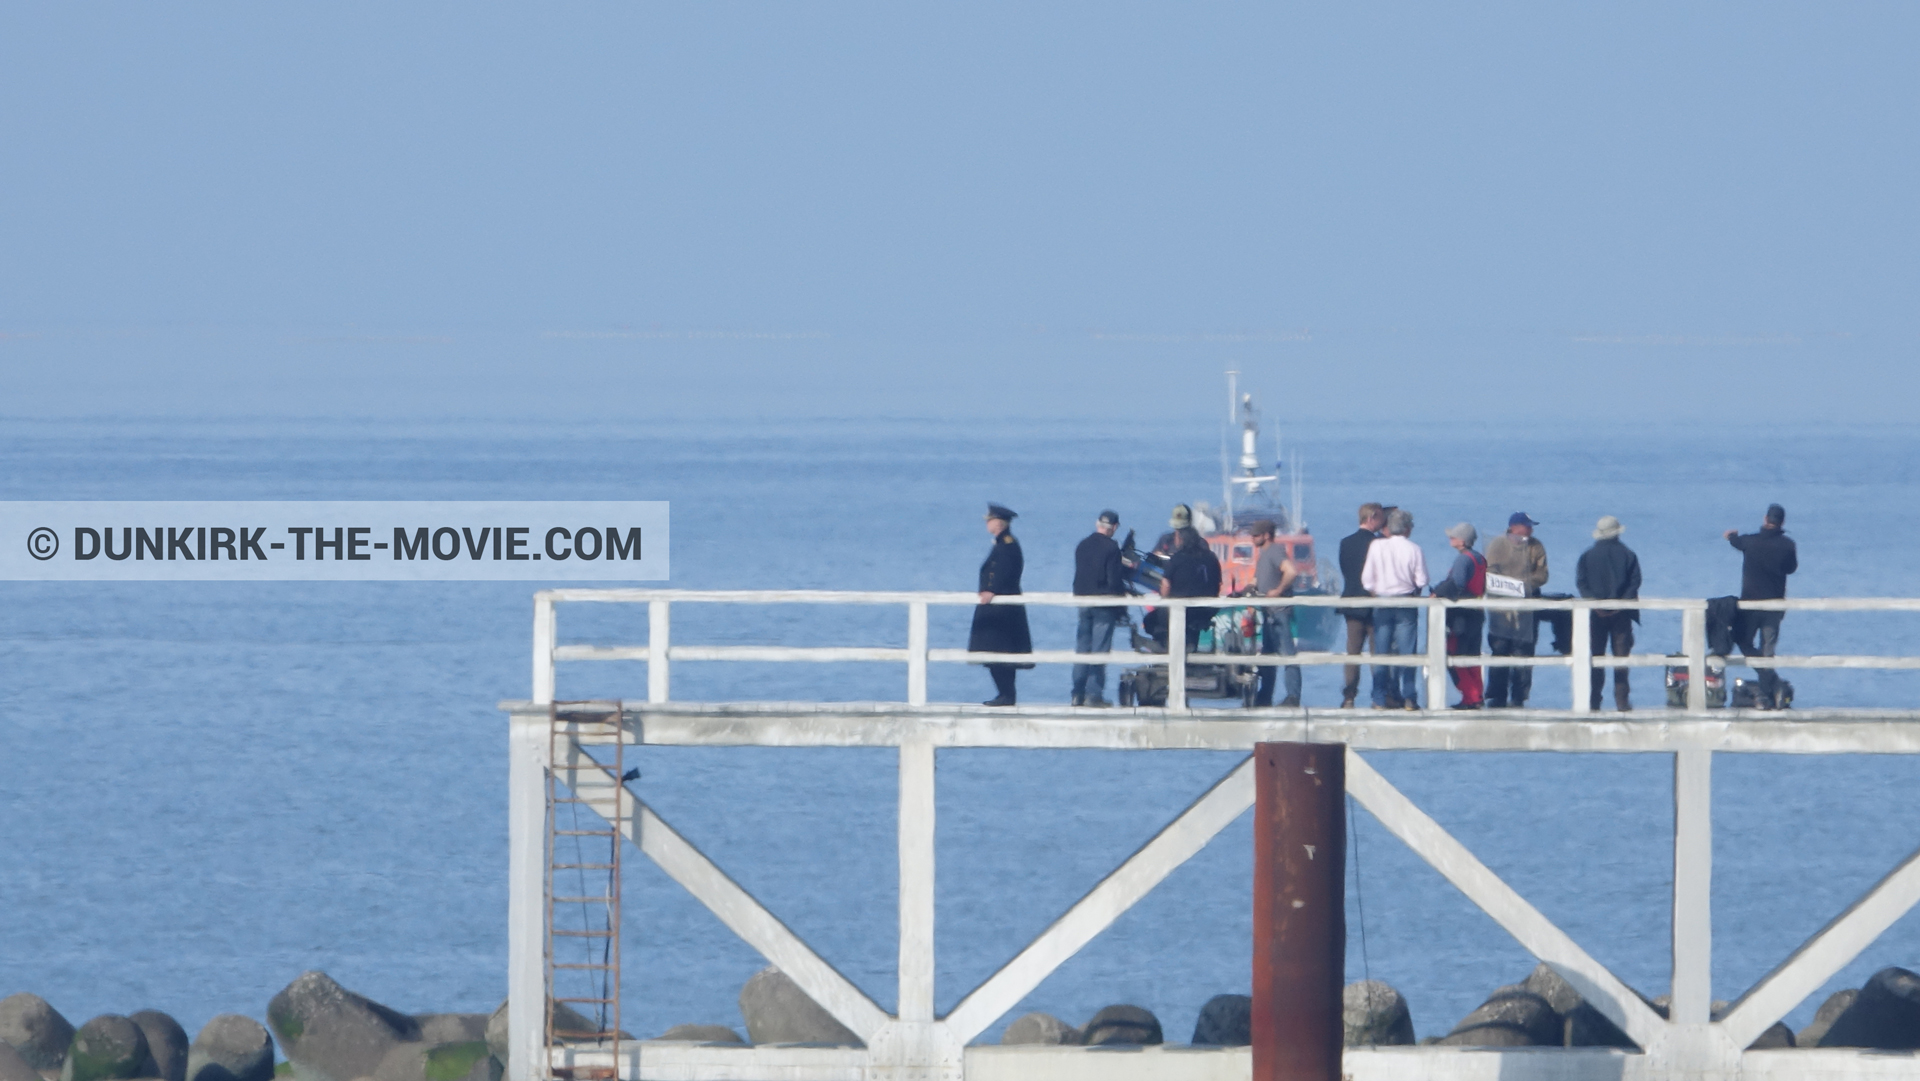 Picture with Hoyte van Hoytema, EST pier, Kenneth Branagh, Christopher Nolan, technical team,  from behind the scene of the Dunkirk movie by Nolan